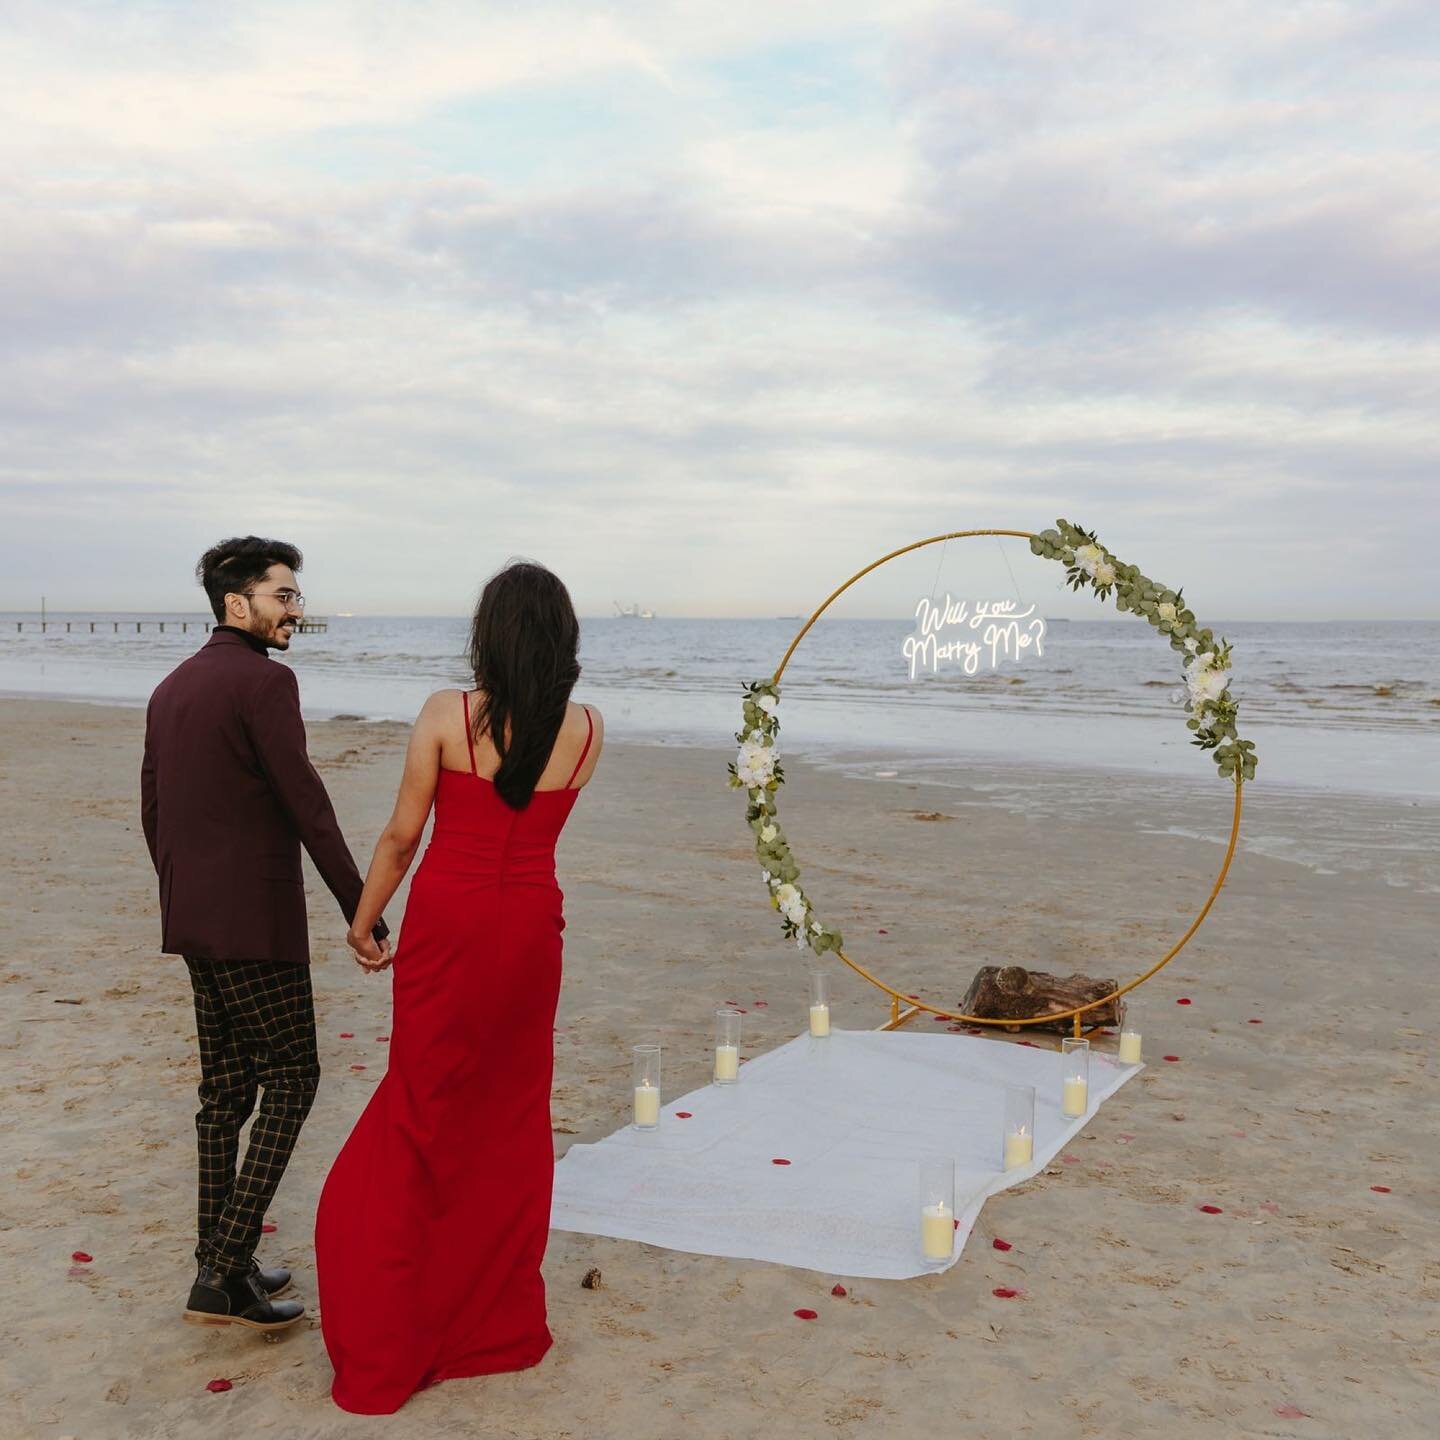 TLDR: Propose to your lover on the beach, and let me in on it 💍

When Amal told me he was planning to pup the question to Gadha on the beach, I couldn&rsquo;t jump on board fast enough. His friends helped with the sweetest setup by the waves, and it